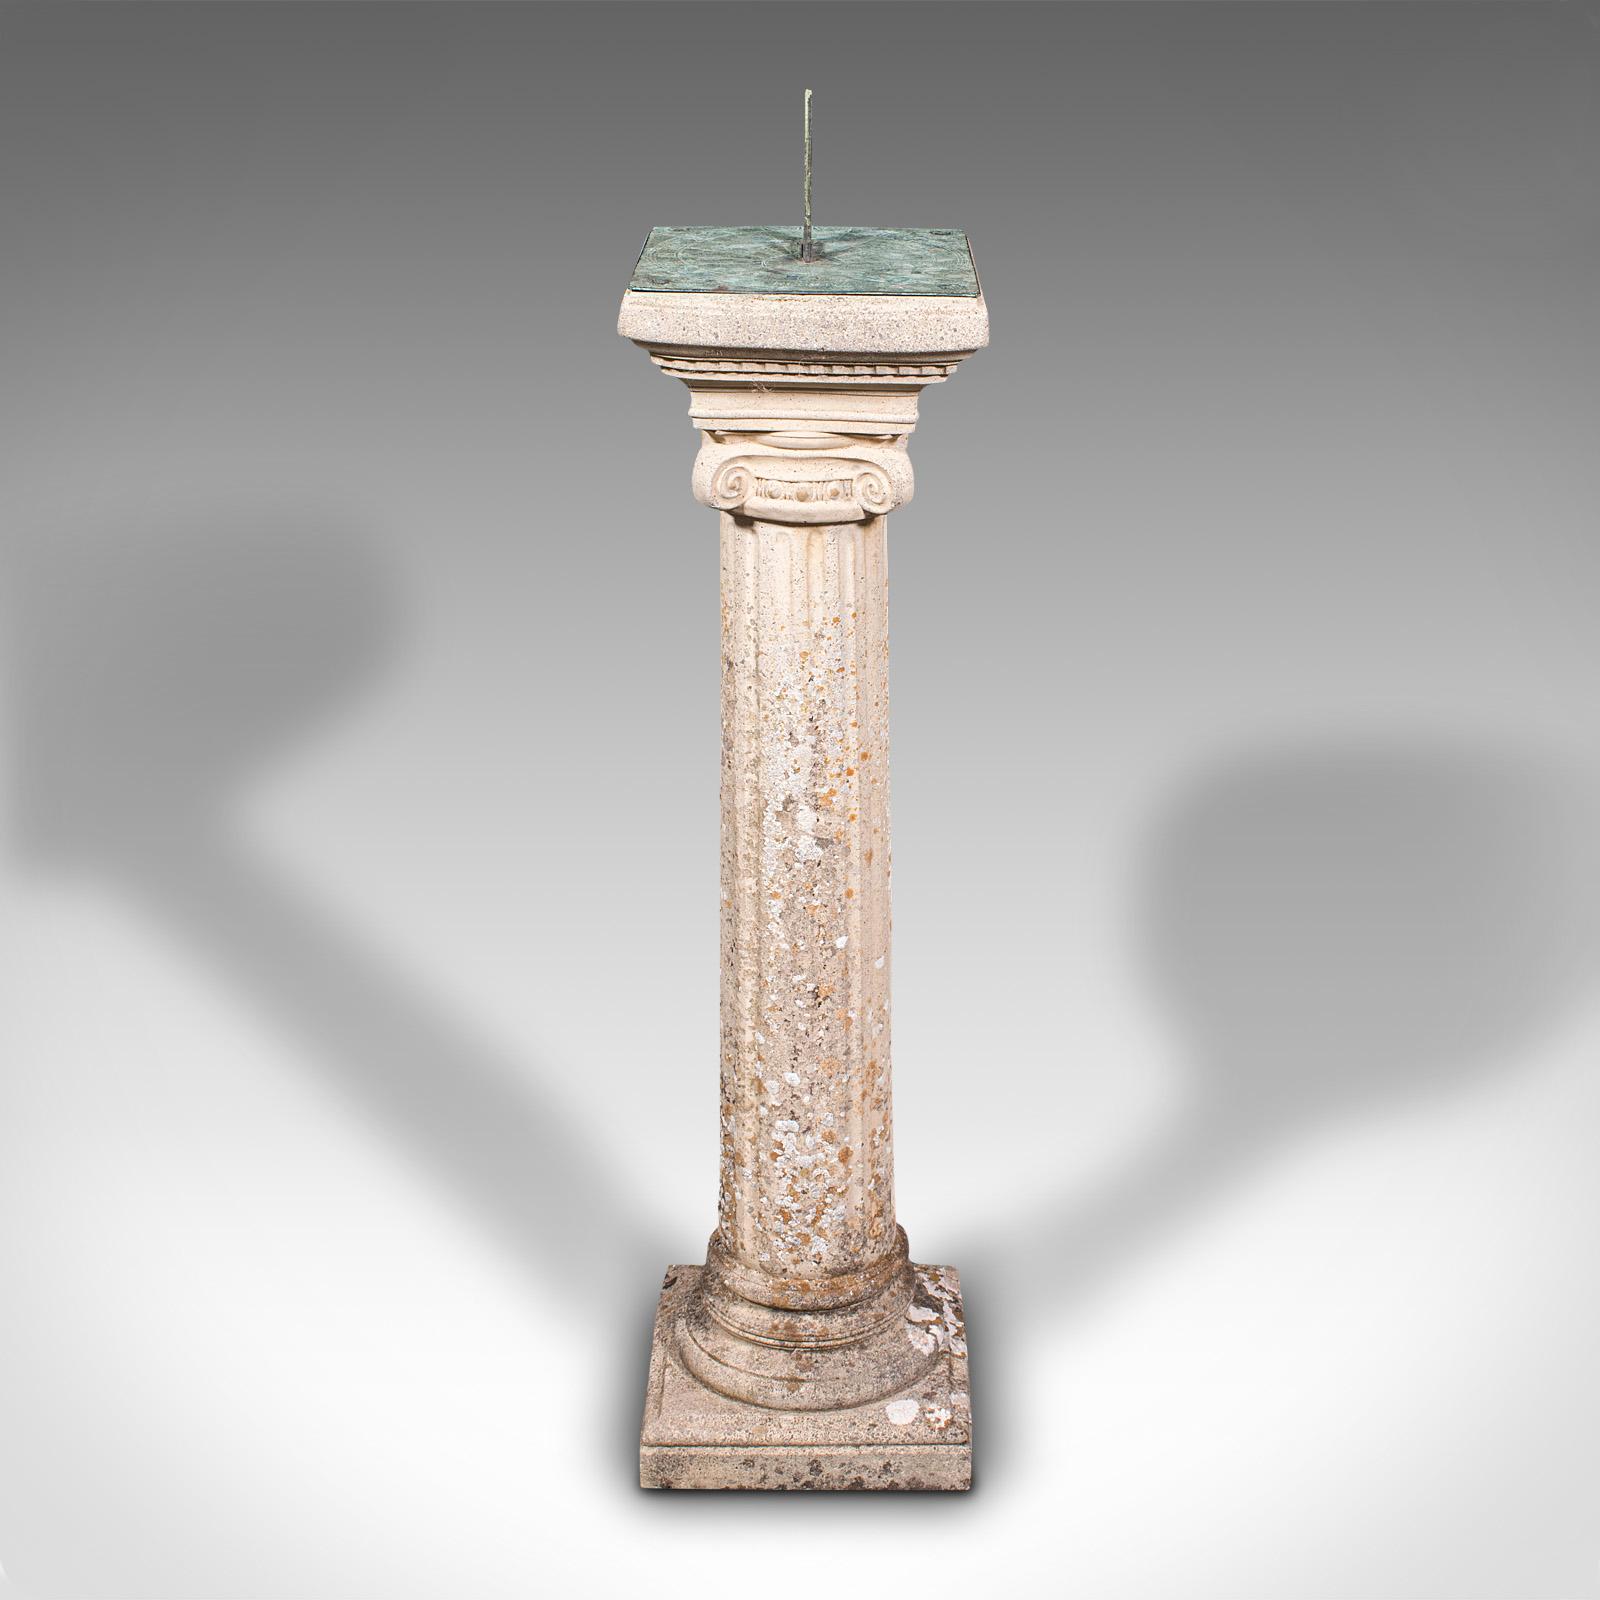 This is a vintage garden sundial. An English, reconstituted stone column with bronze dial and gnomon, dating to the mid 20th century, circa 1950.

Fascinating treat for your garden with lovely weathered appearance
Displays a desirable aged patina